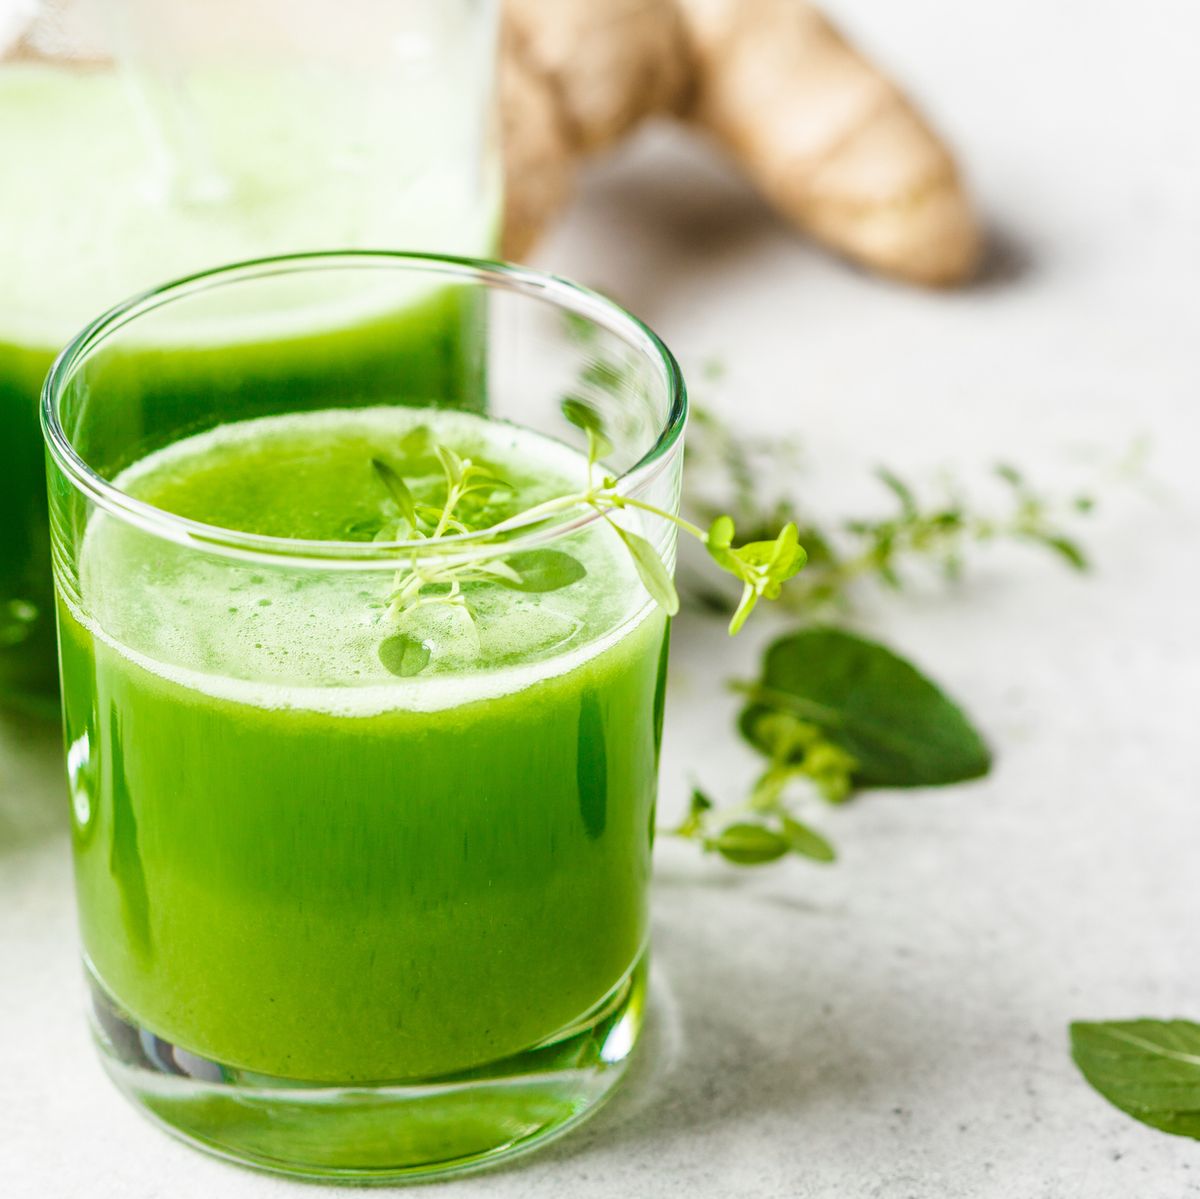 What Fruits and Veggies Juice Well Together? 10 Tasty Combinations